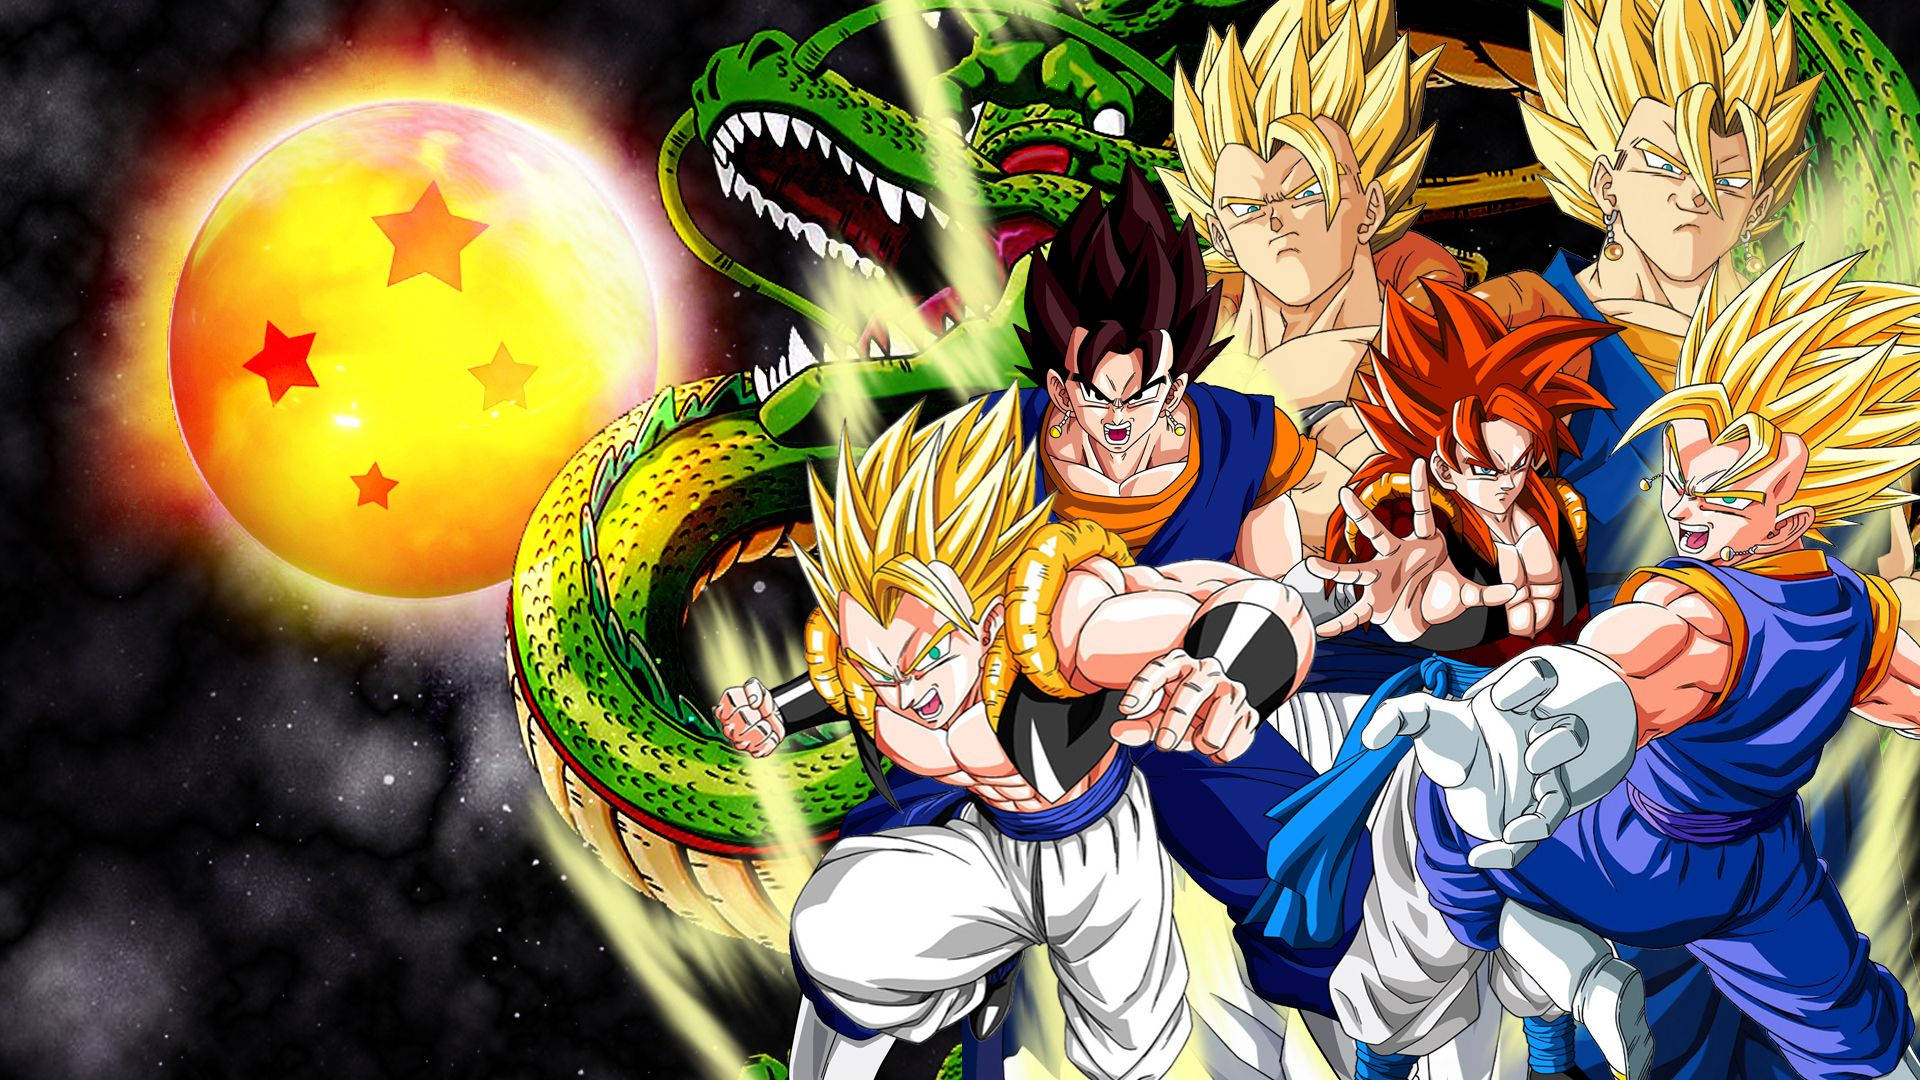 The epic cast of Dragon Ball Z Wallpaper